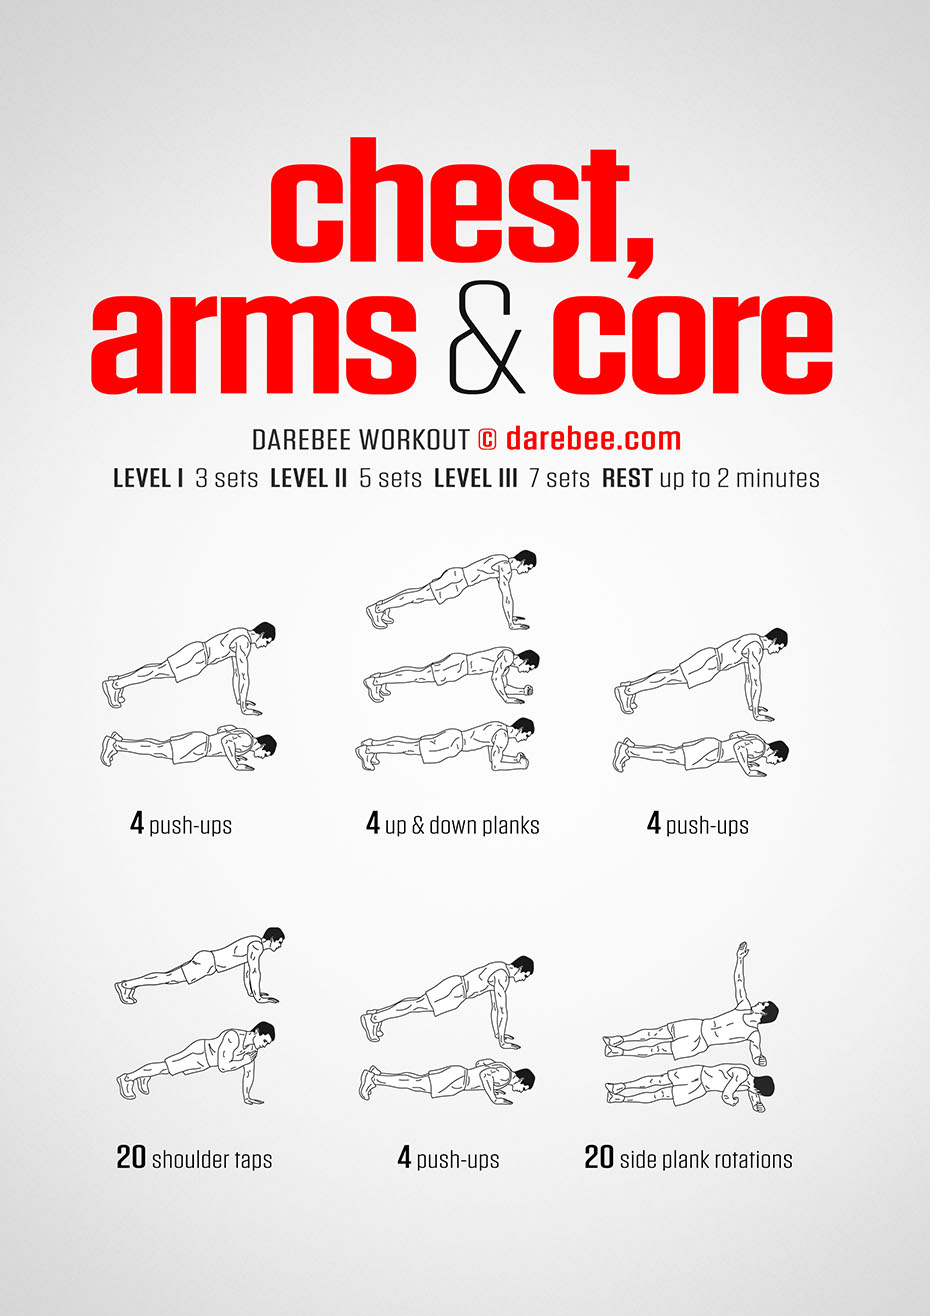 Chest & Core Workout